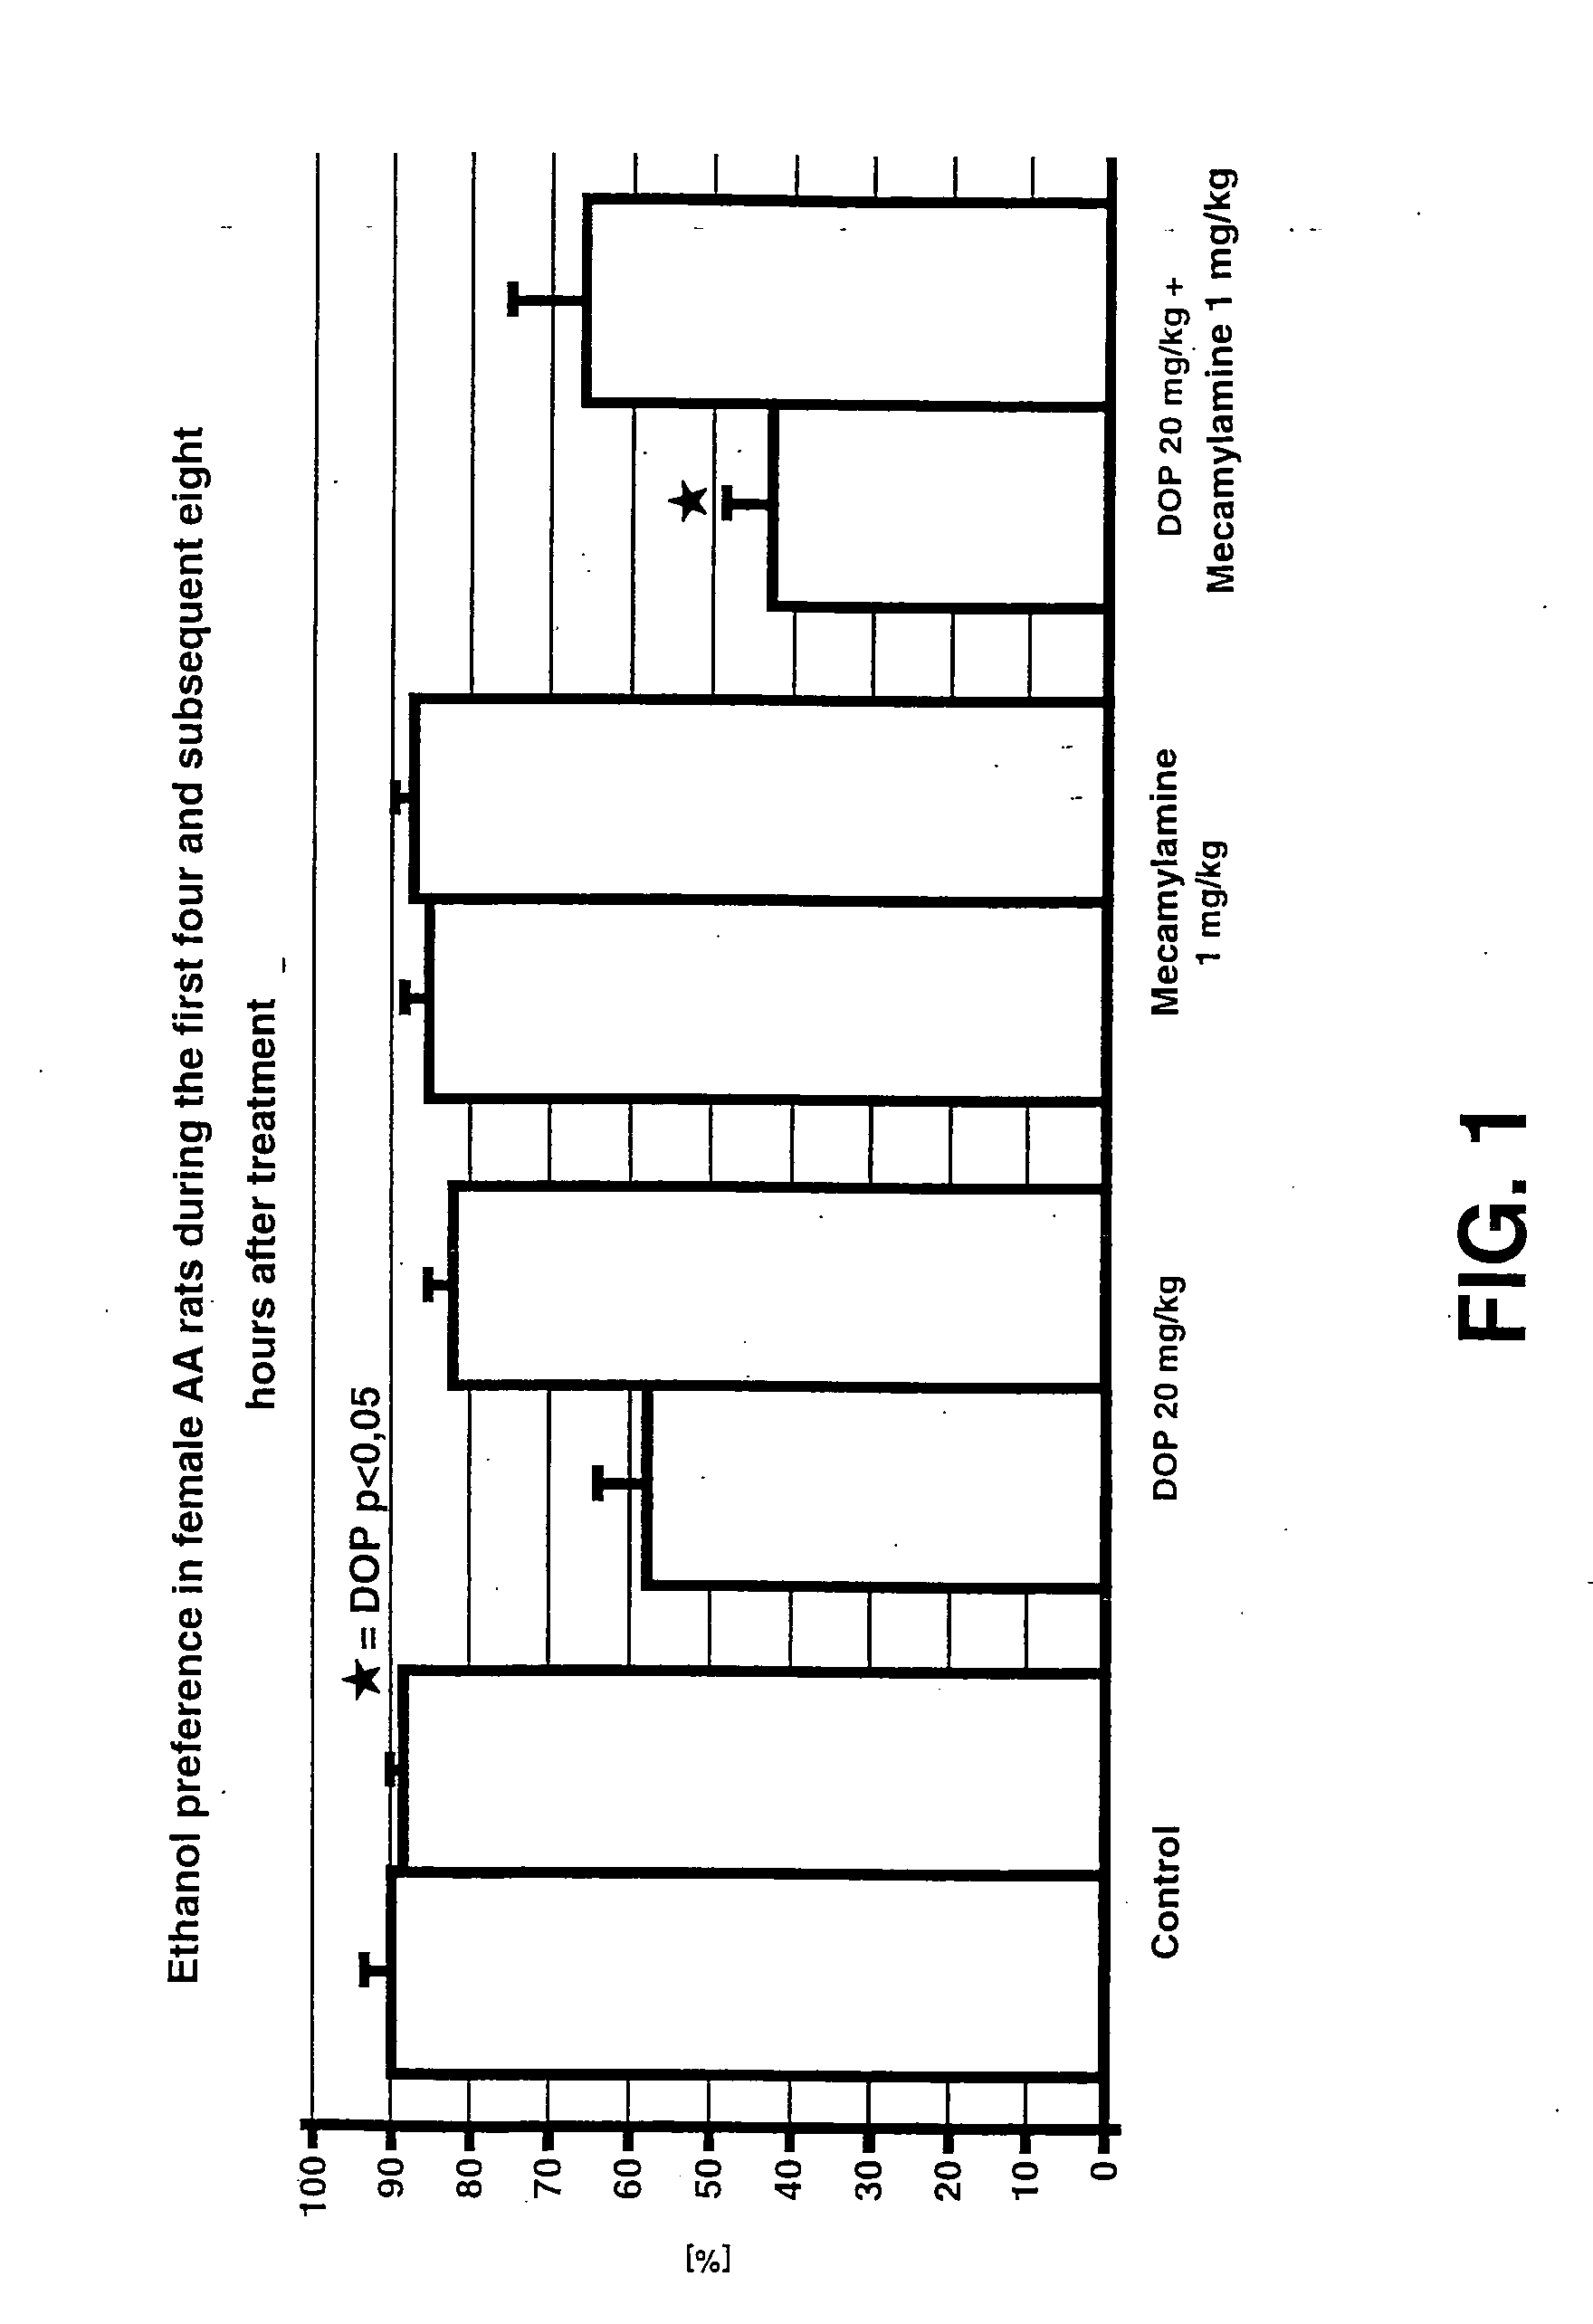 Combination of desoxypeganine and mecamylanine for the treatment of alcohol abuse